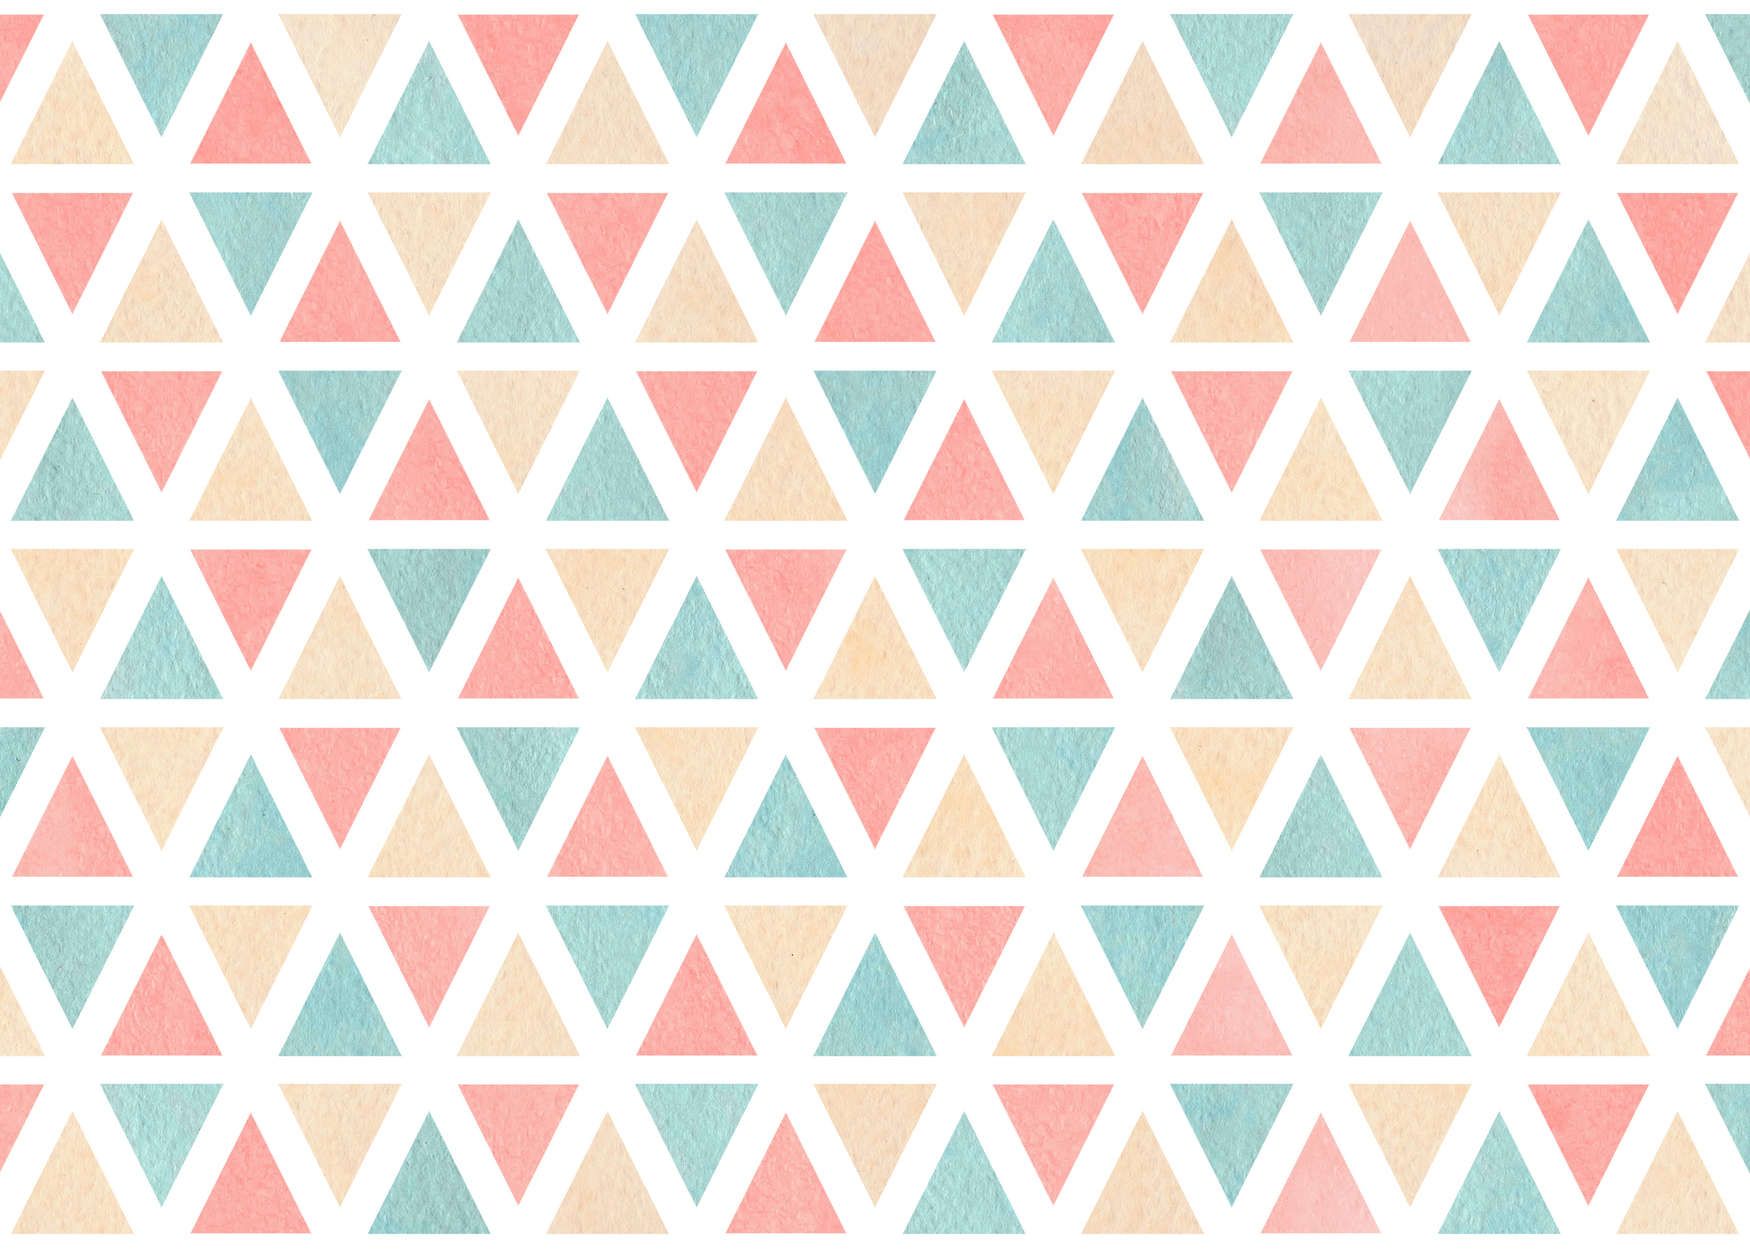             Photo wallpaper graphic pattern with colourful triangles - Smooth & pearlescent fleece
        